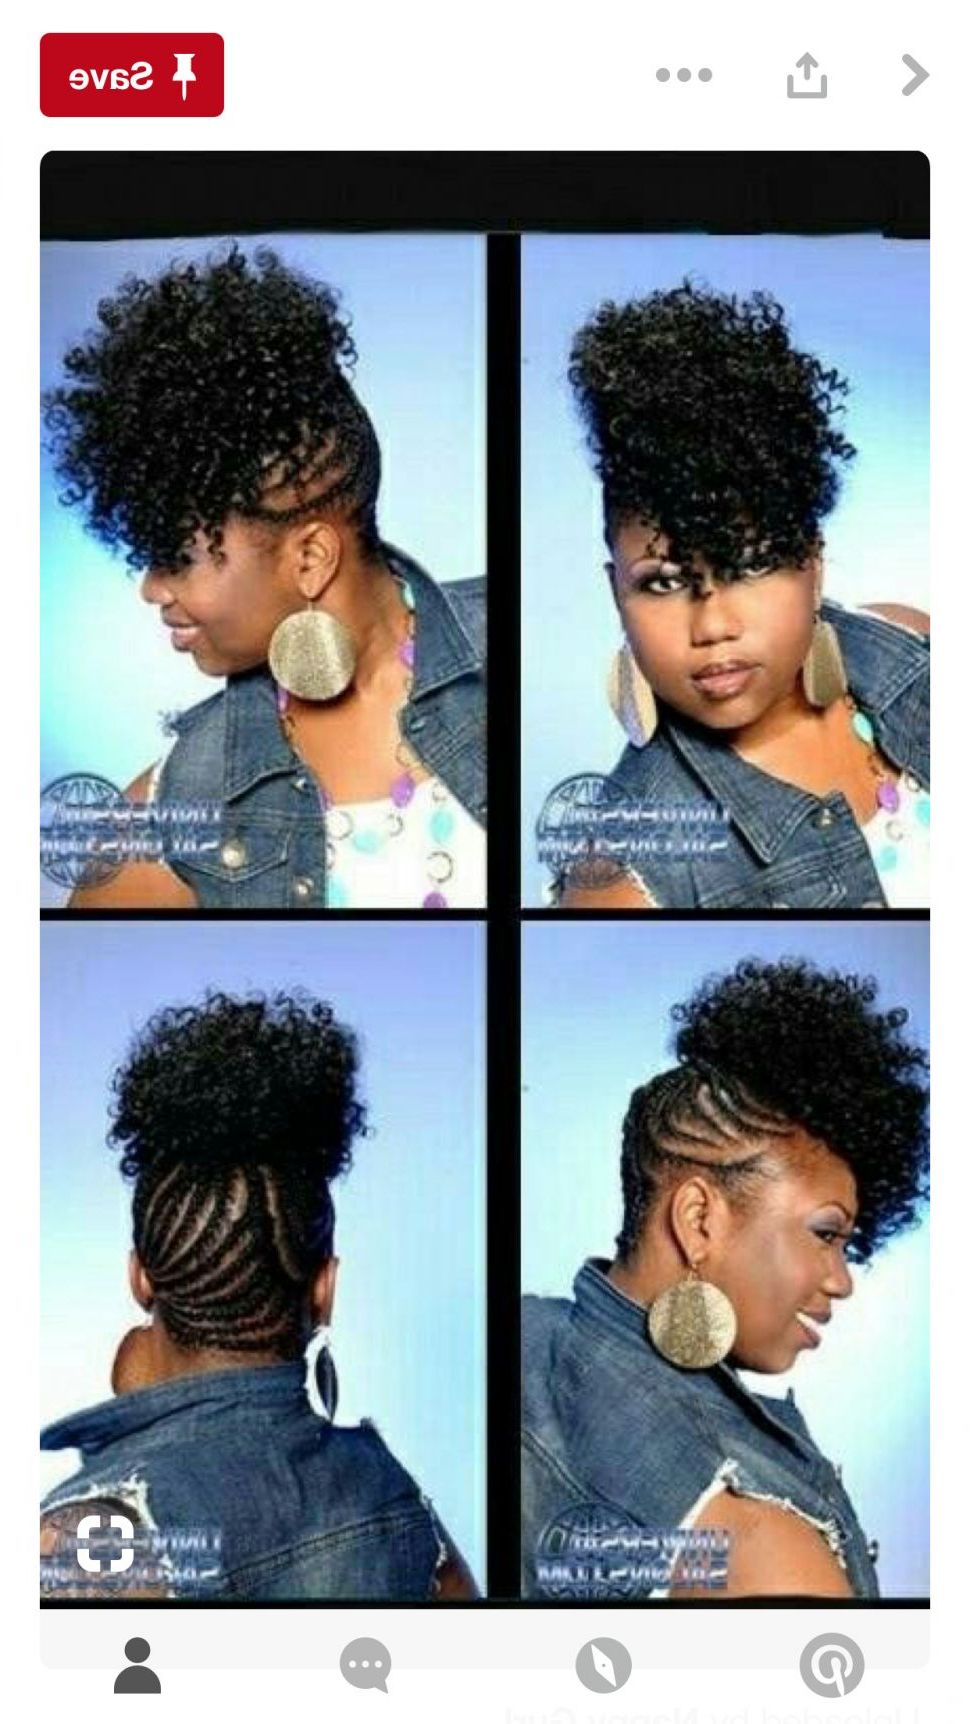 Hairstyles : Natural Curly Mohawk Hairstyles Alluring Pin For Well Known Natural Curly Hair Mohawk Hairstyles (View 14 of 20)